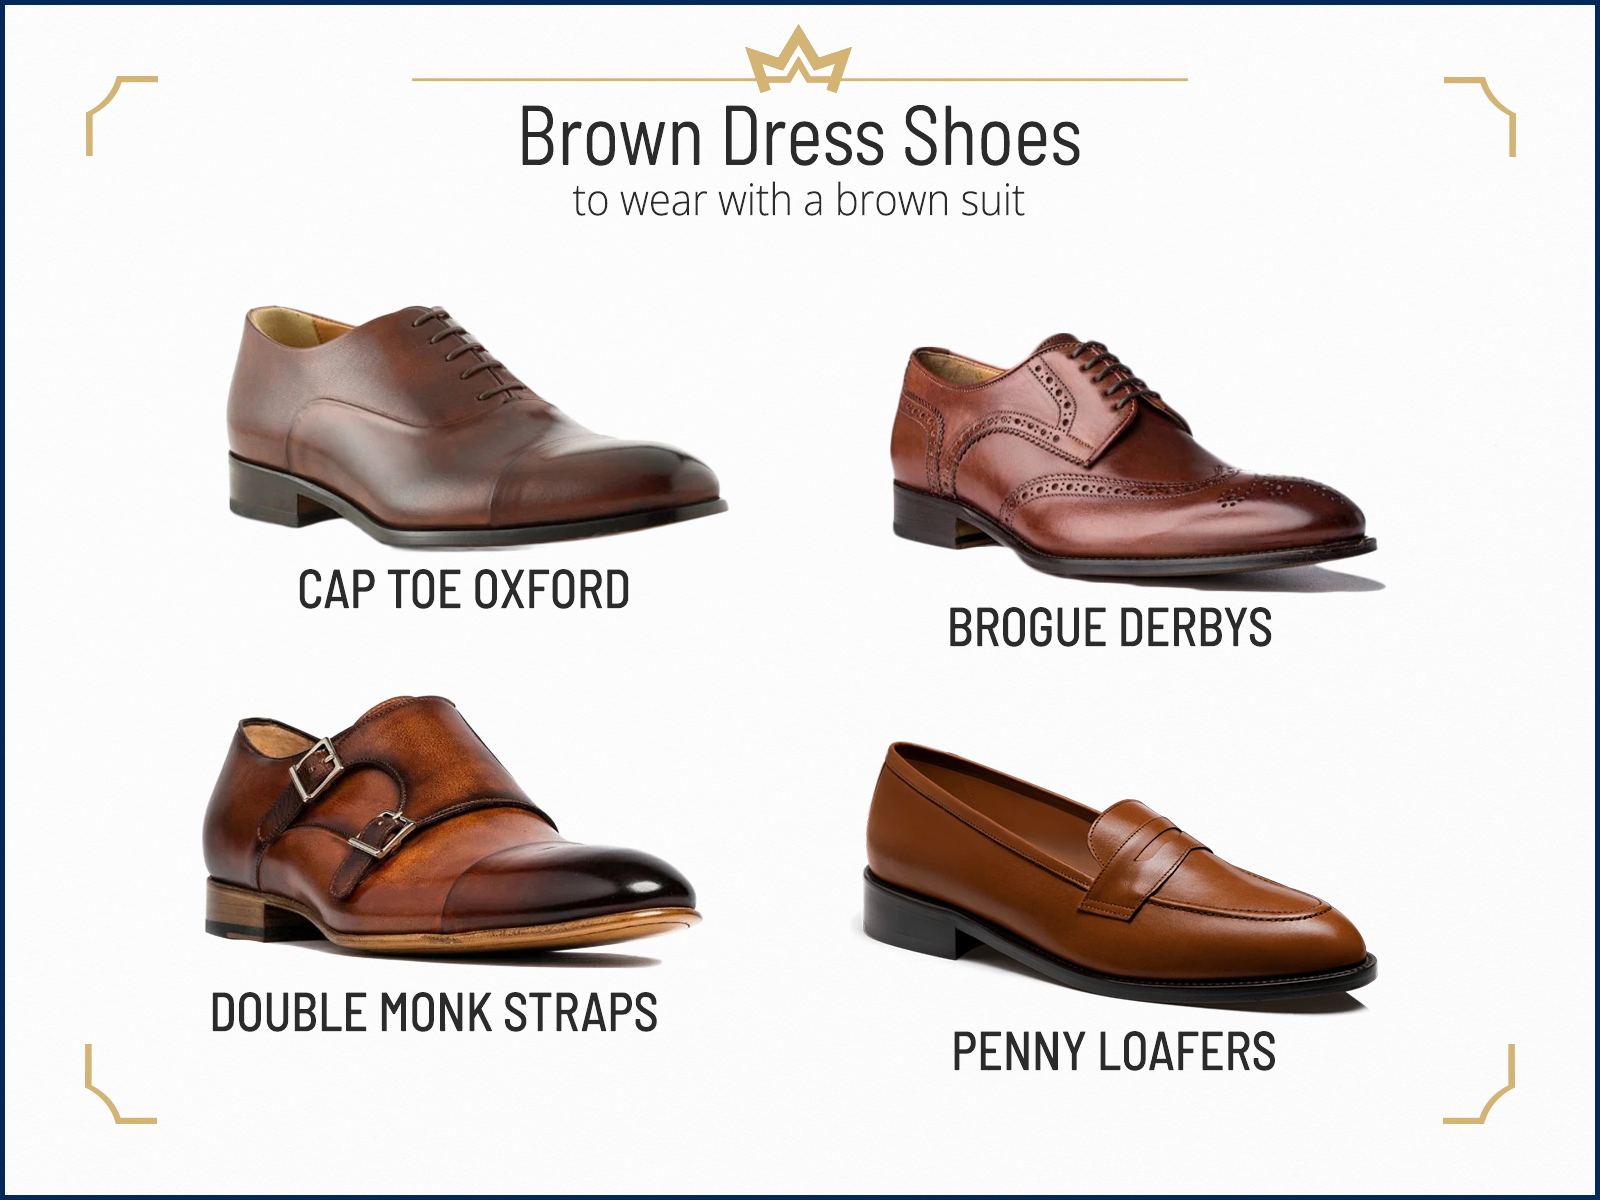 Recommended brown dress shoe types for brown suits